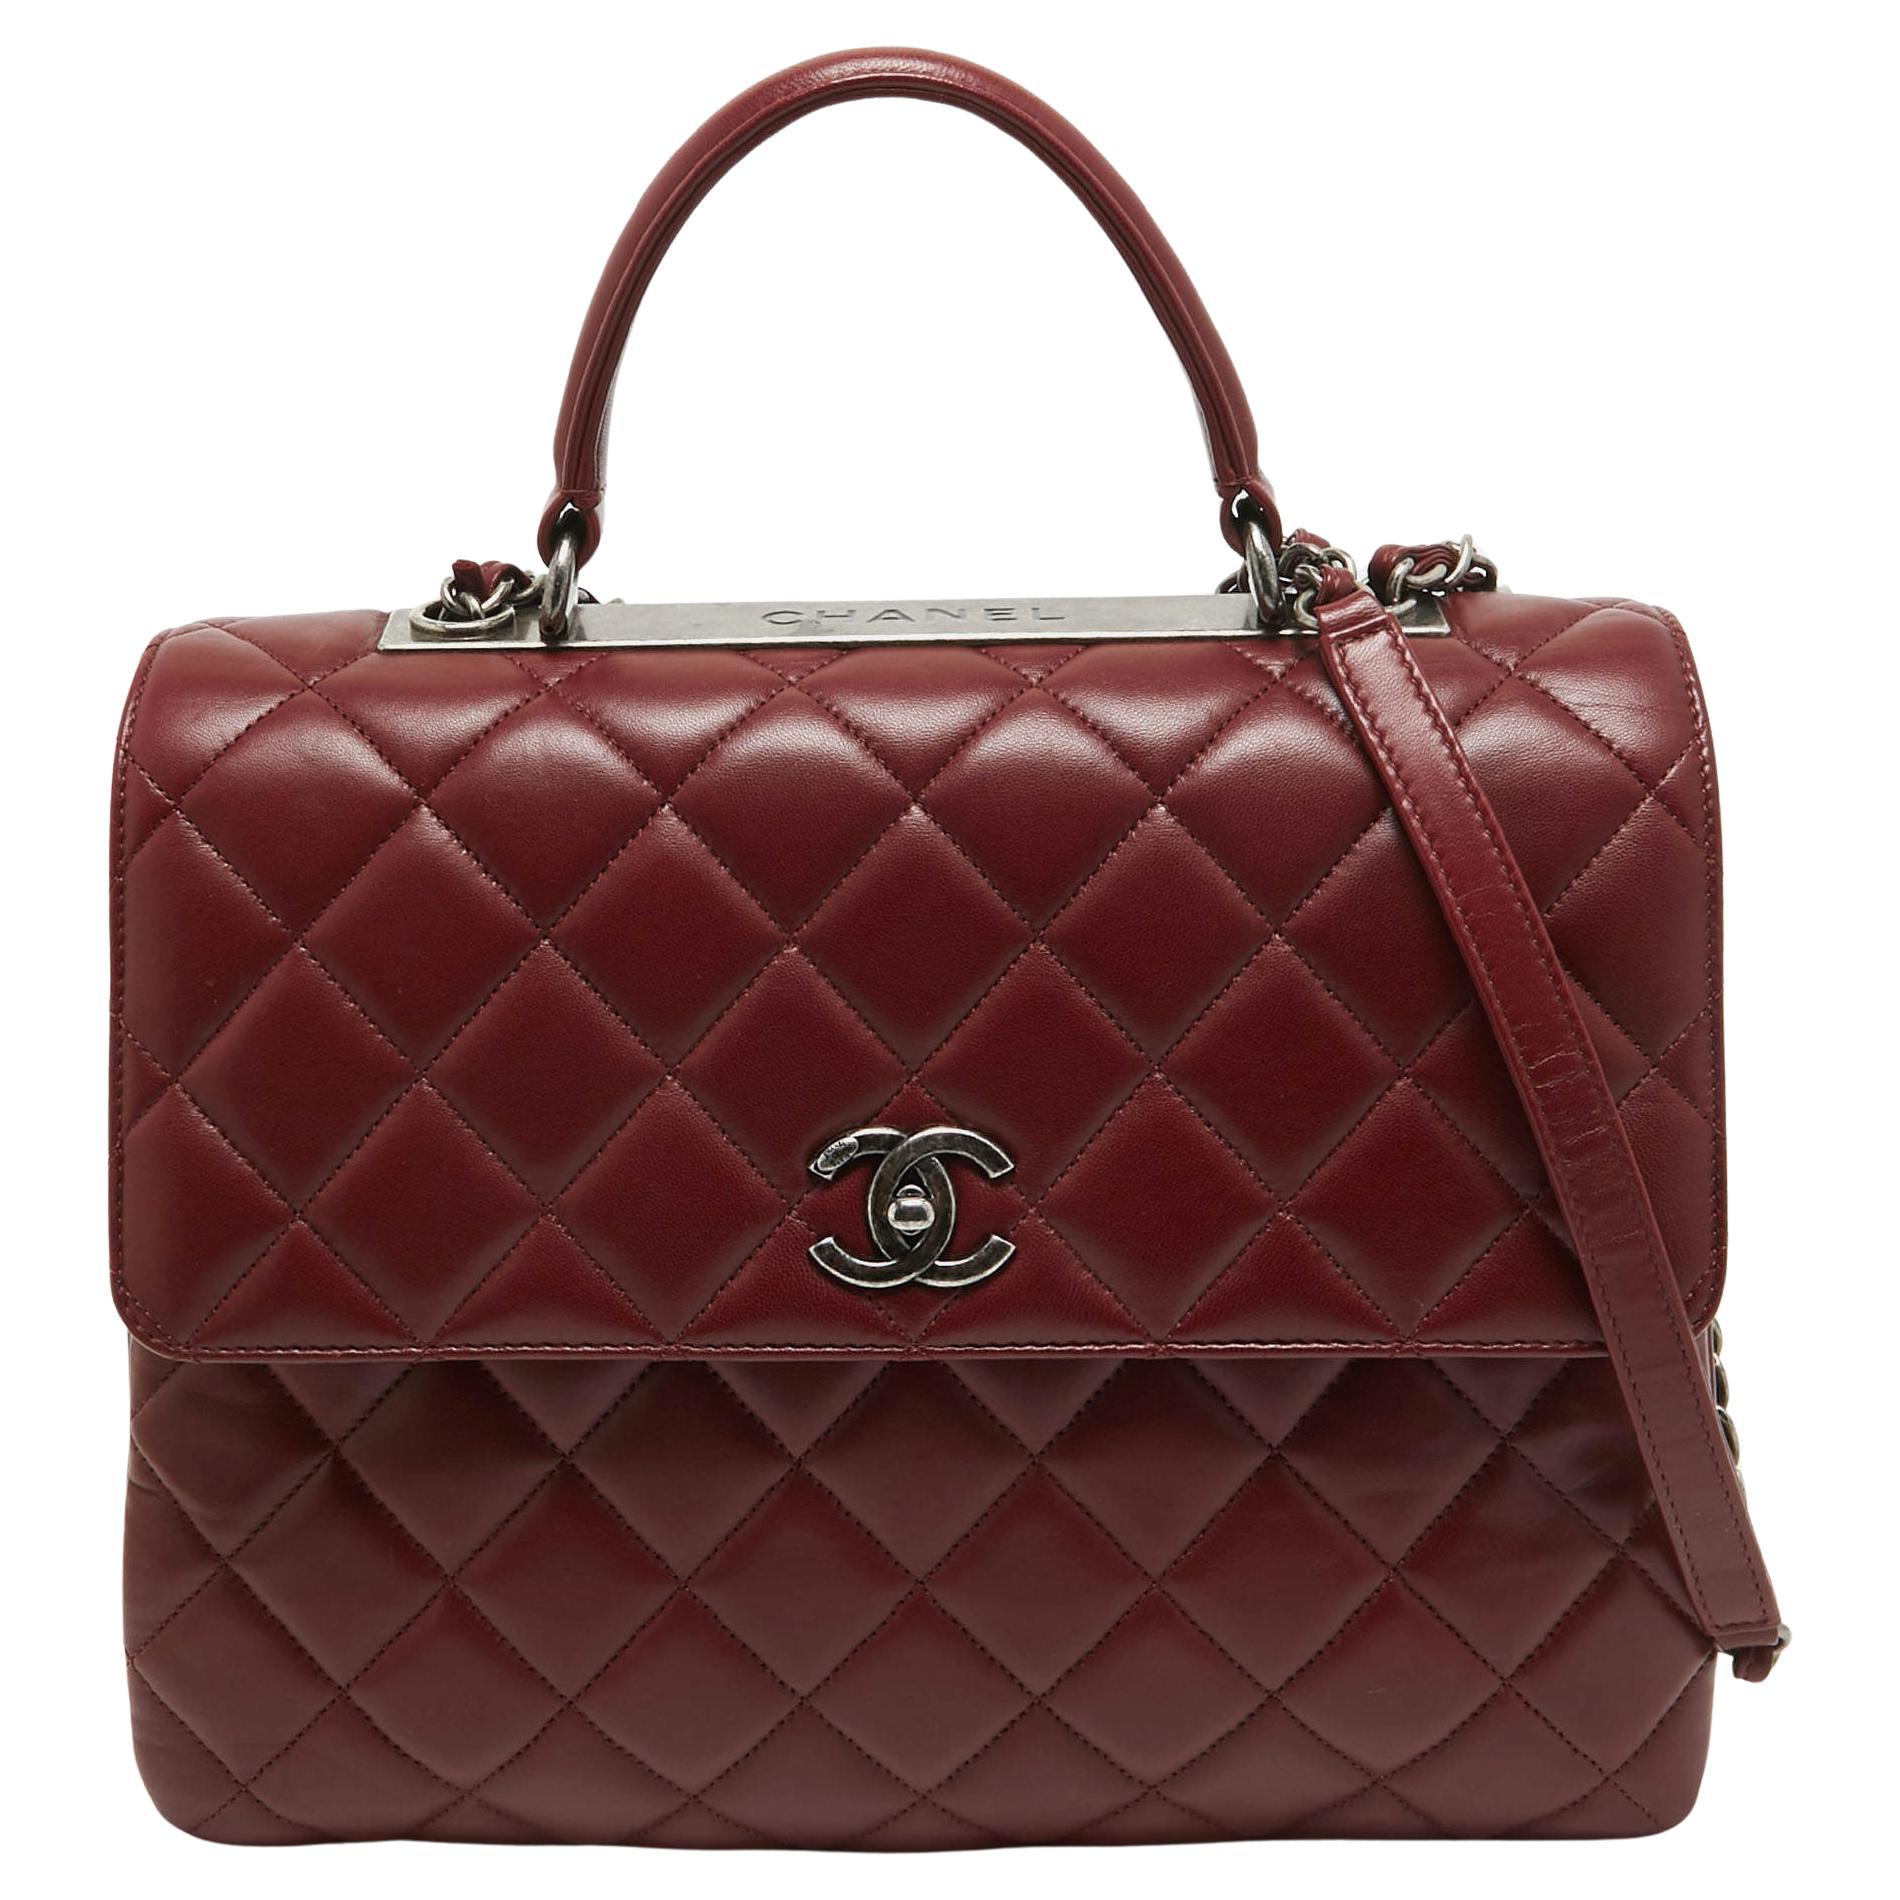 Chanel Dark Red Quilted Leather Large Trendy CC Top Handle Bag For Sale